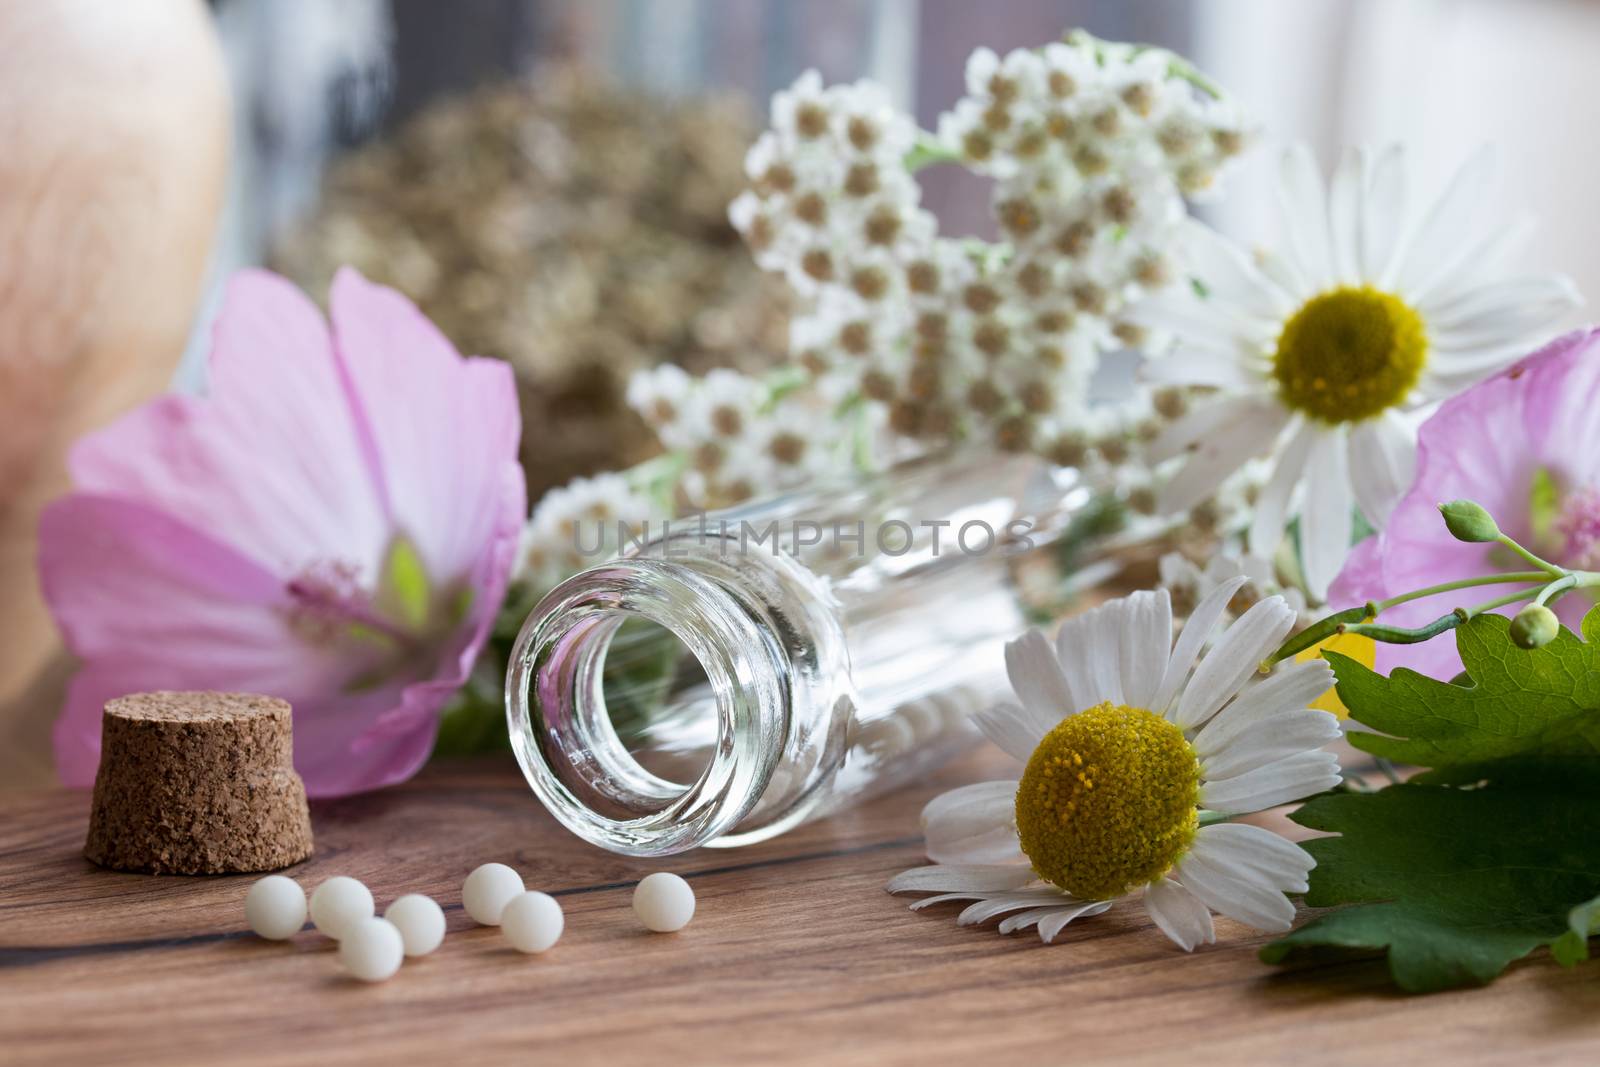 A bottle of homeopathic globules with chamomile, yarrow and other flowers in the background